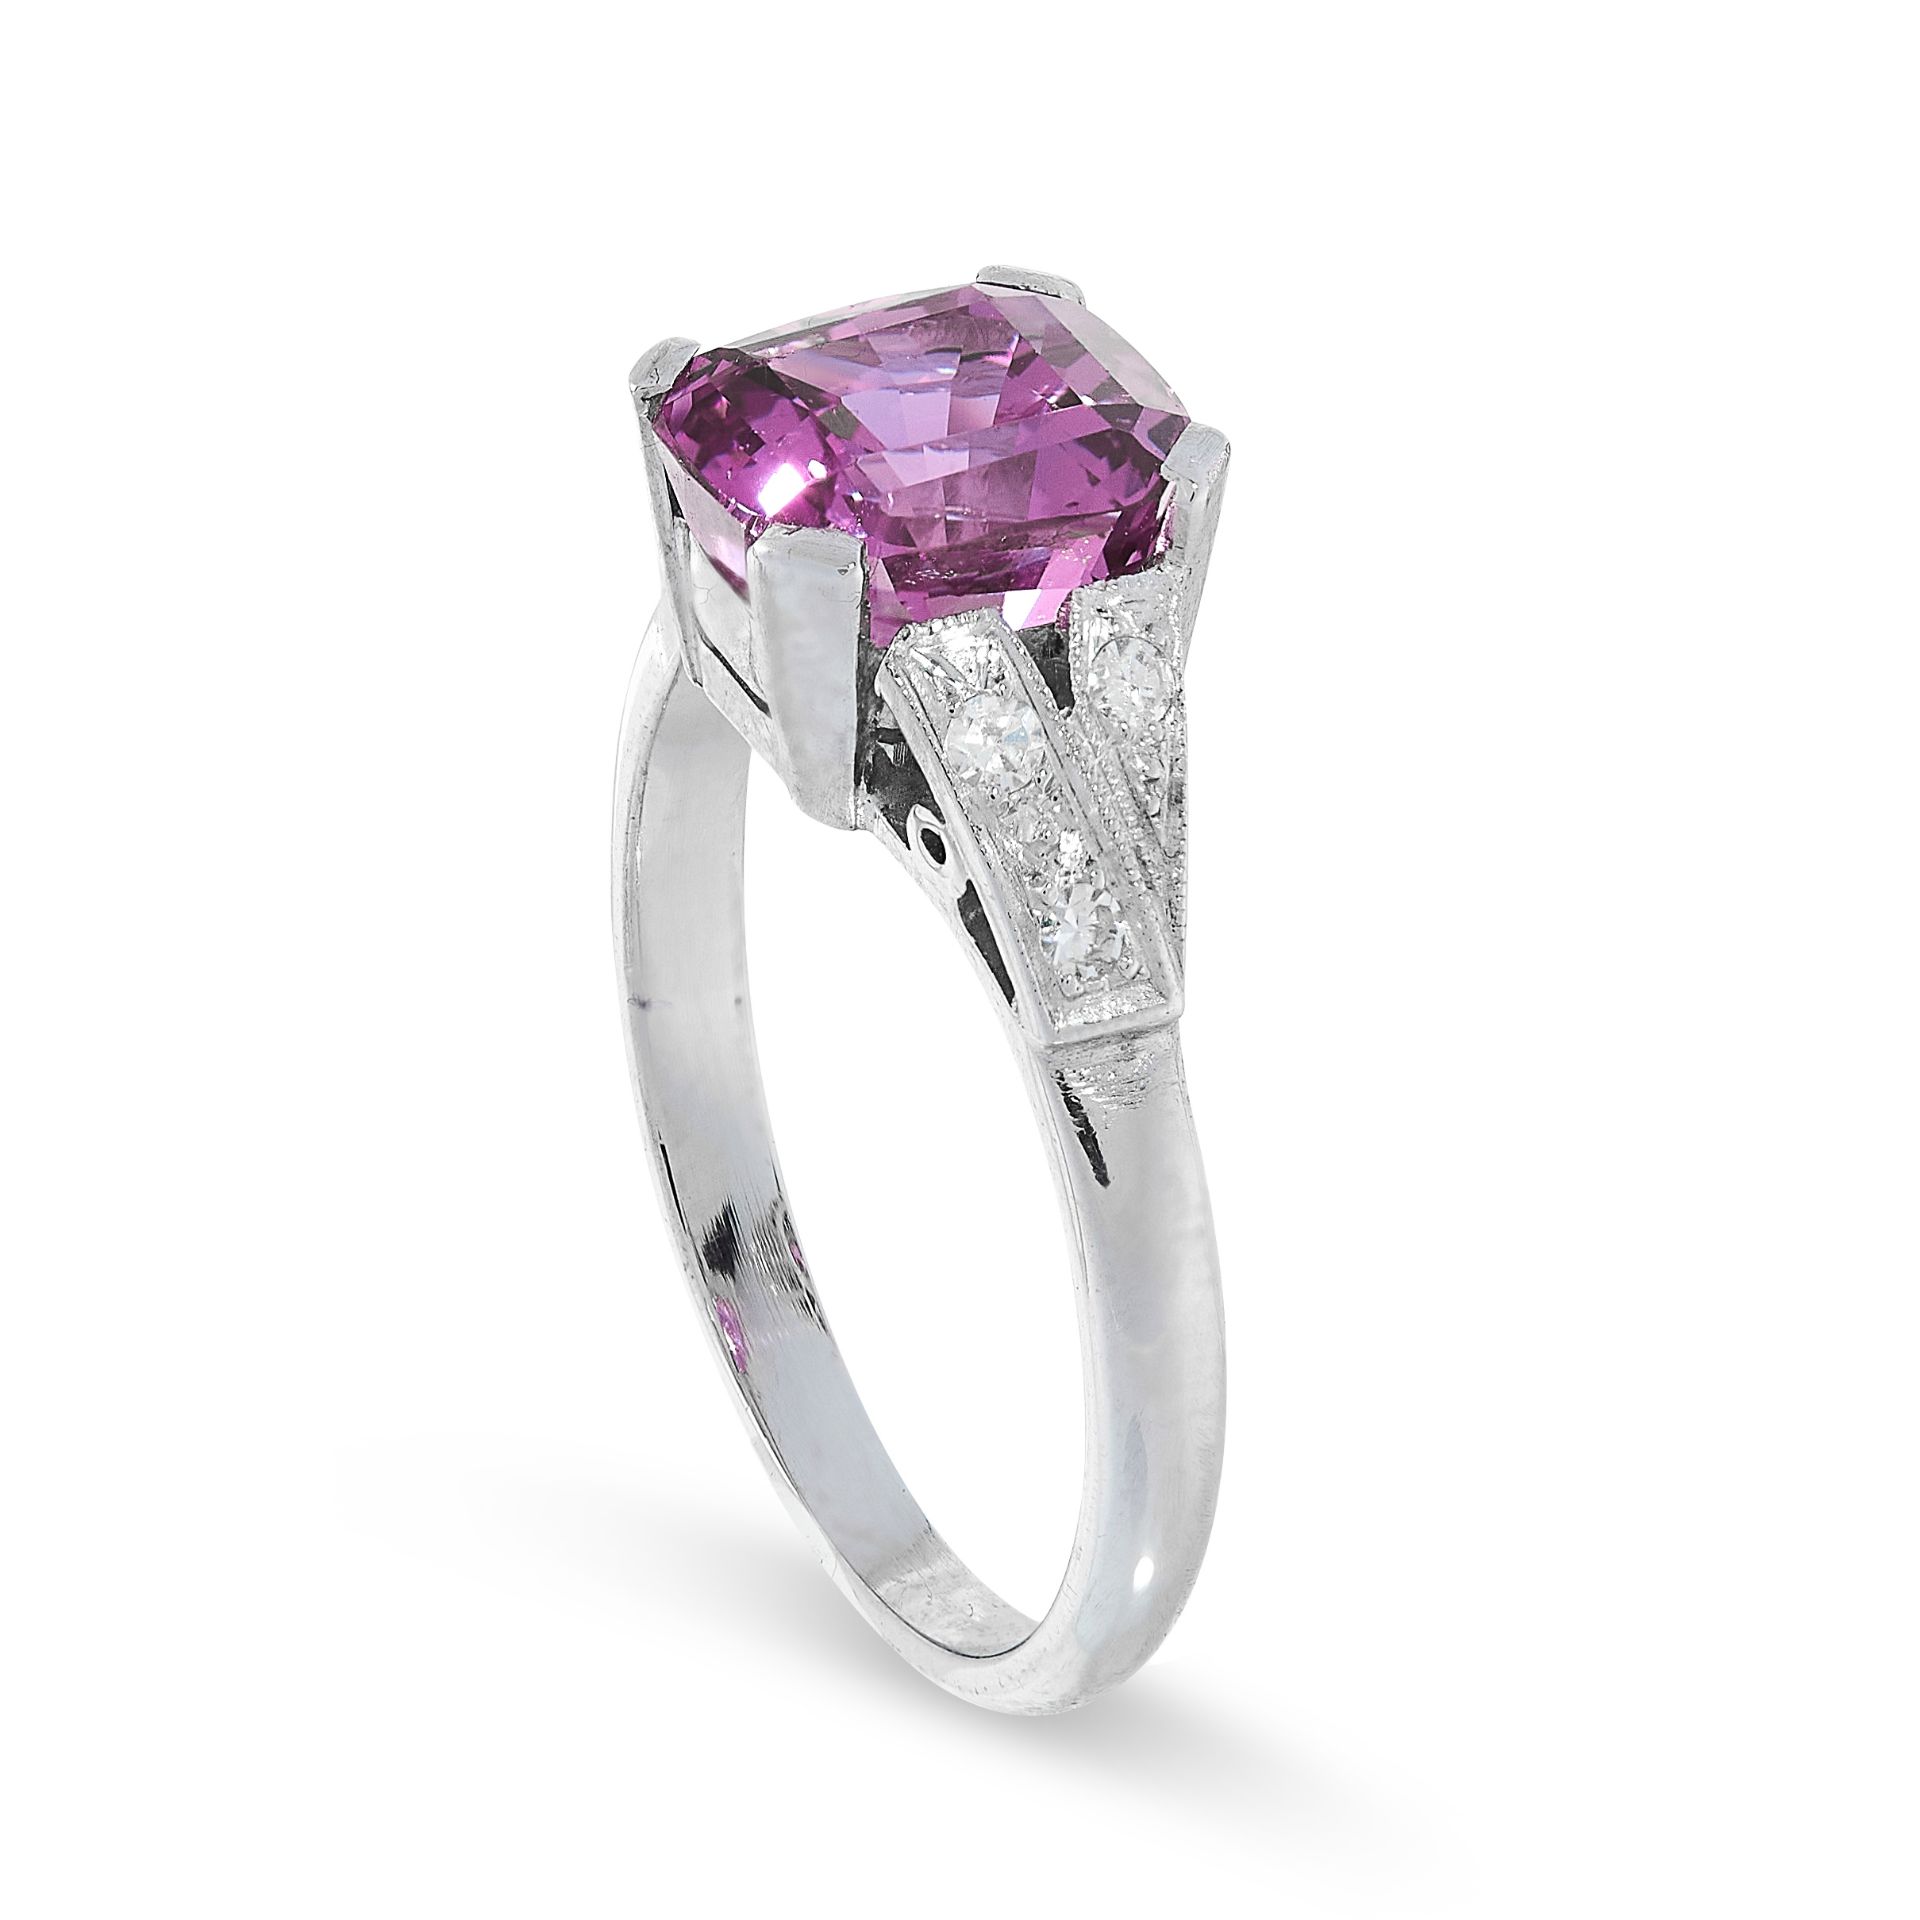 UNHEATED PINK SAPPHIRE AND DIAMOND RING claw-set with an octagonal mixed-cut pink sapphire - Image 2 of 2